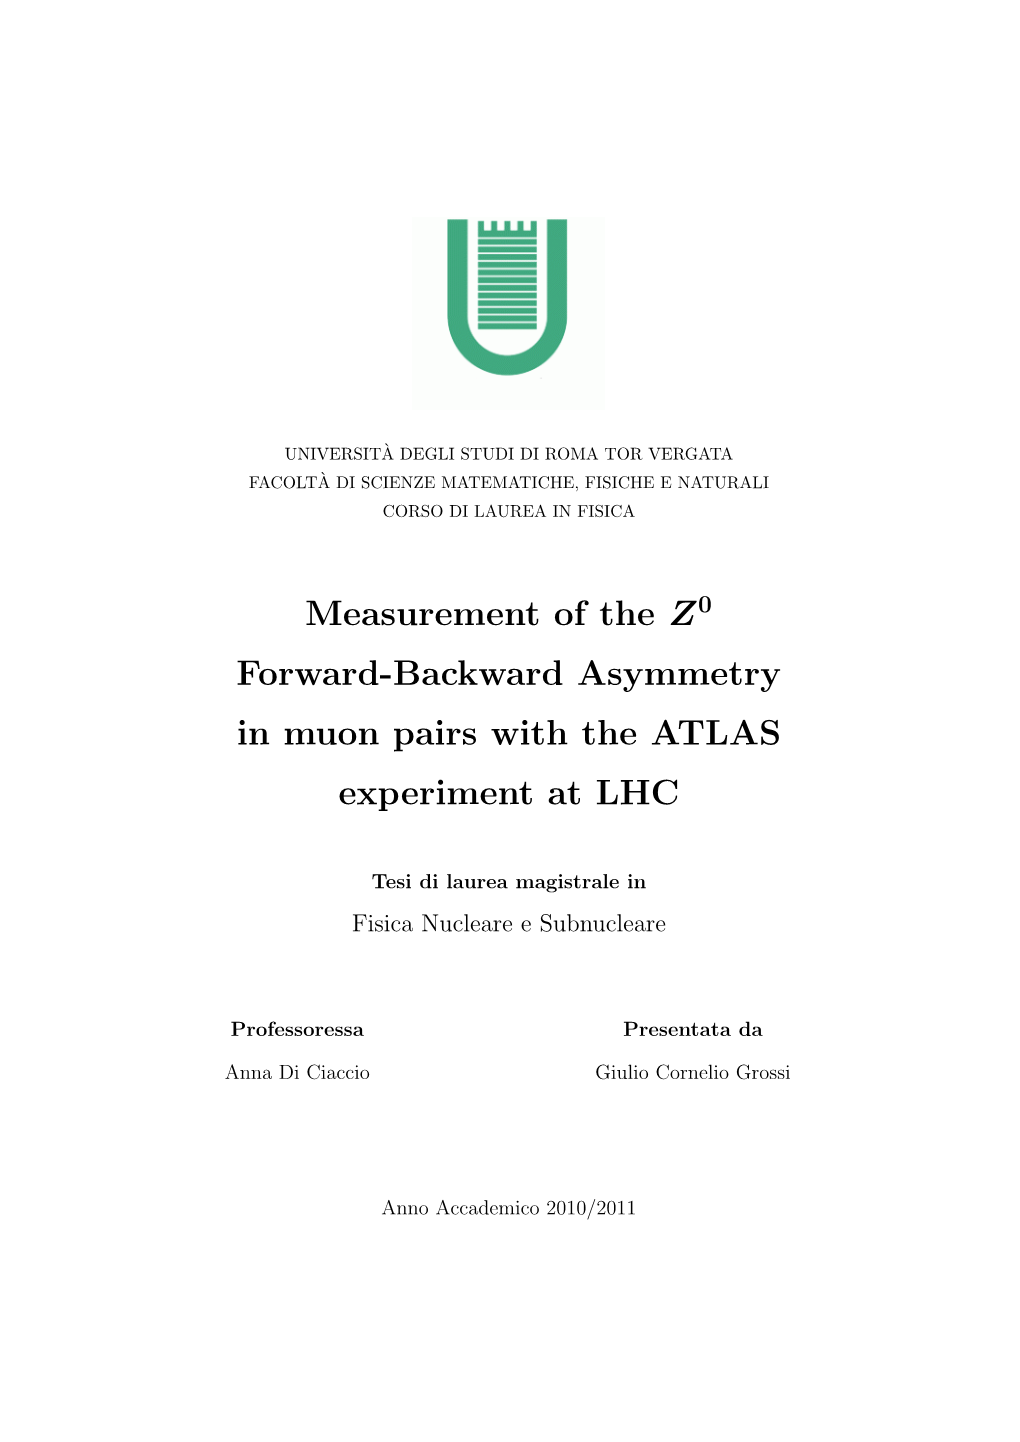 Measurement of the Z Forward-Backward Asymmetry in Muon Pairs with the ATLAS Experiment At